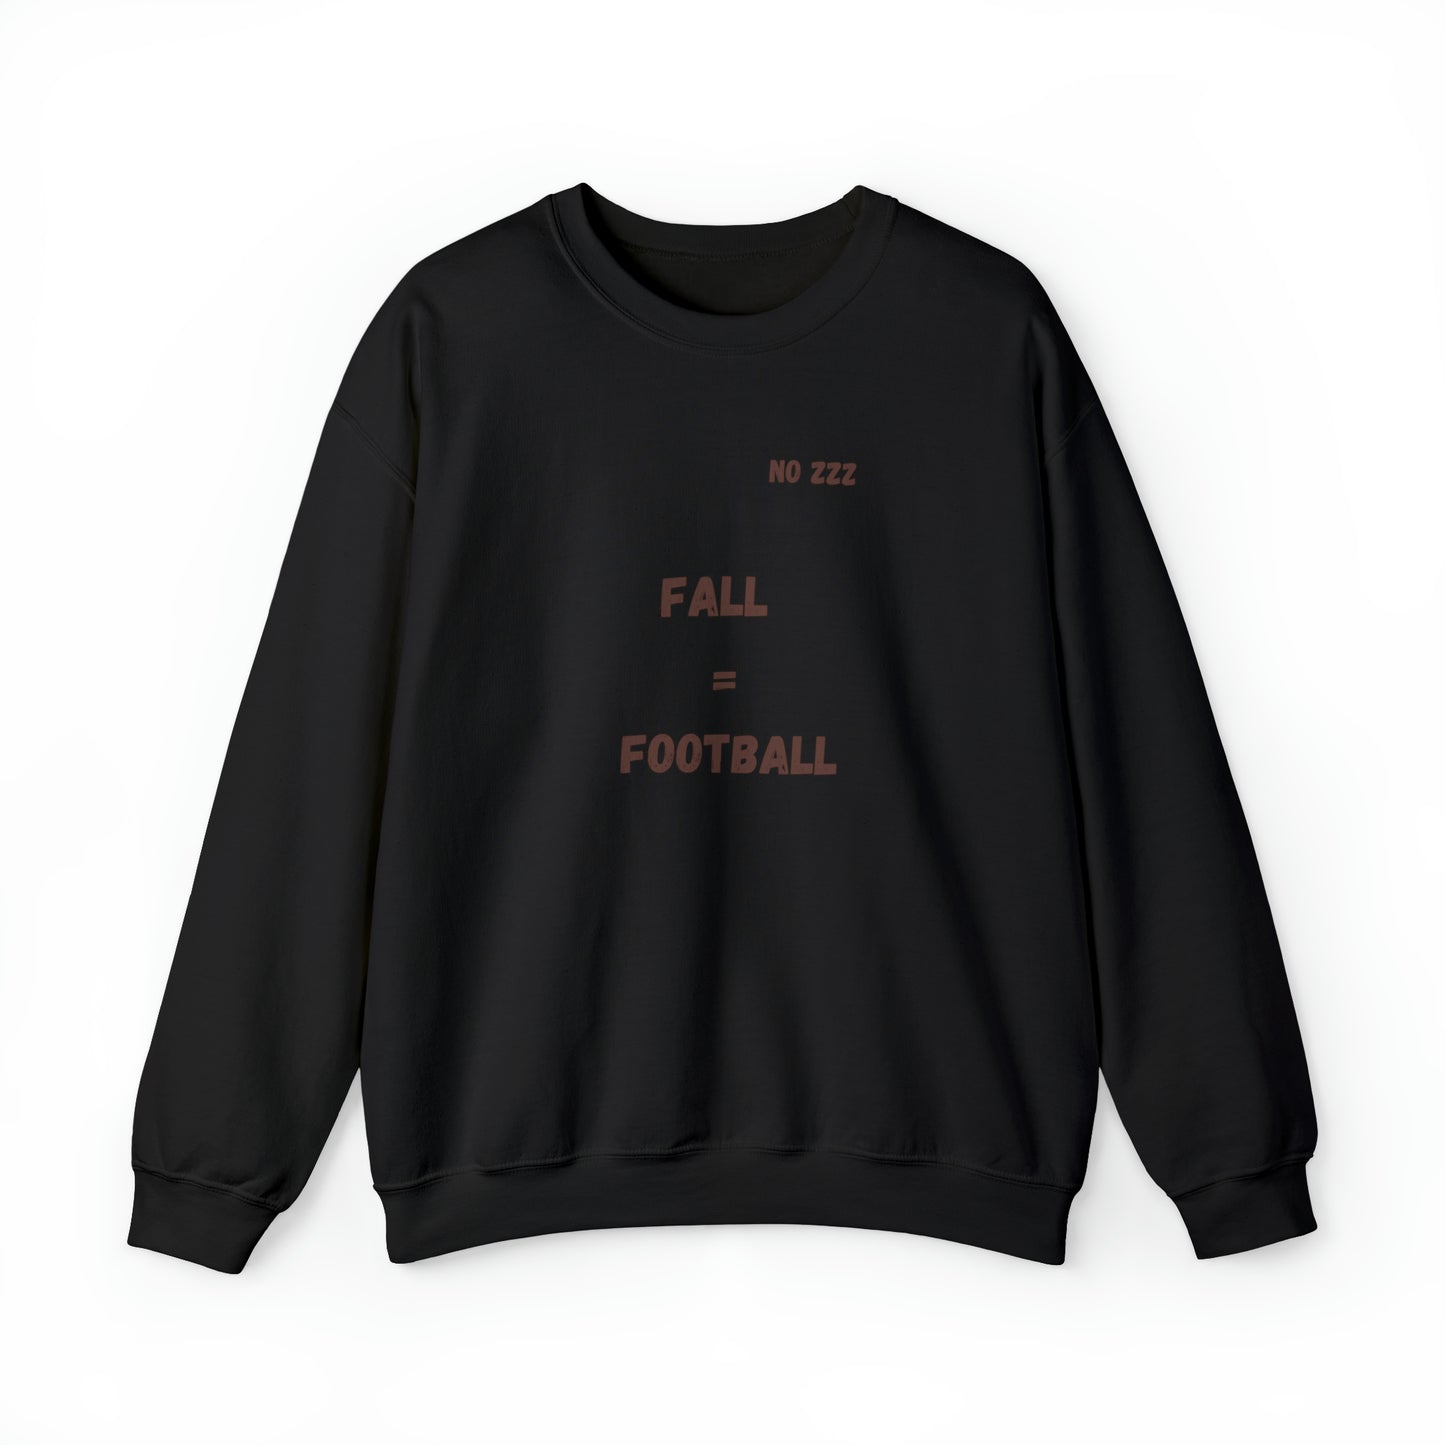 Football Means Fall